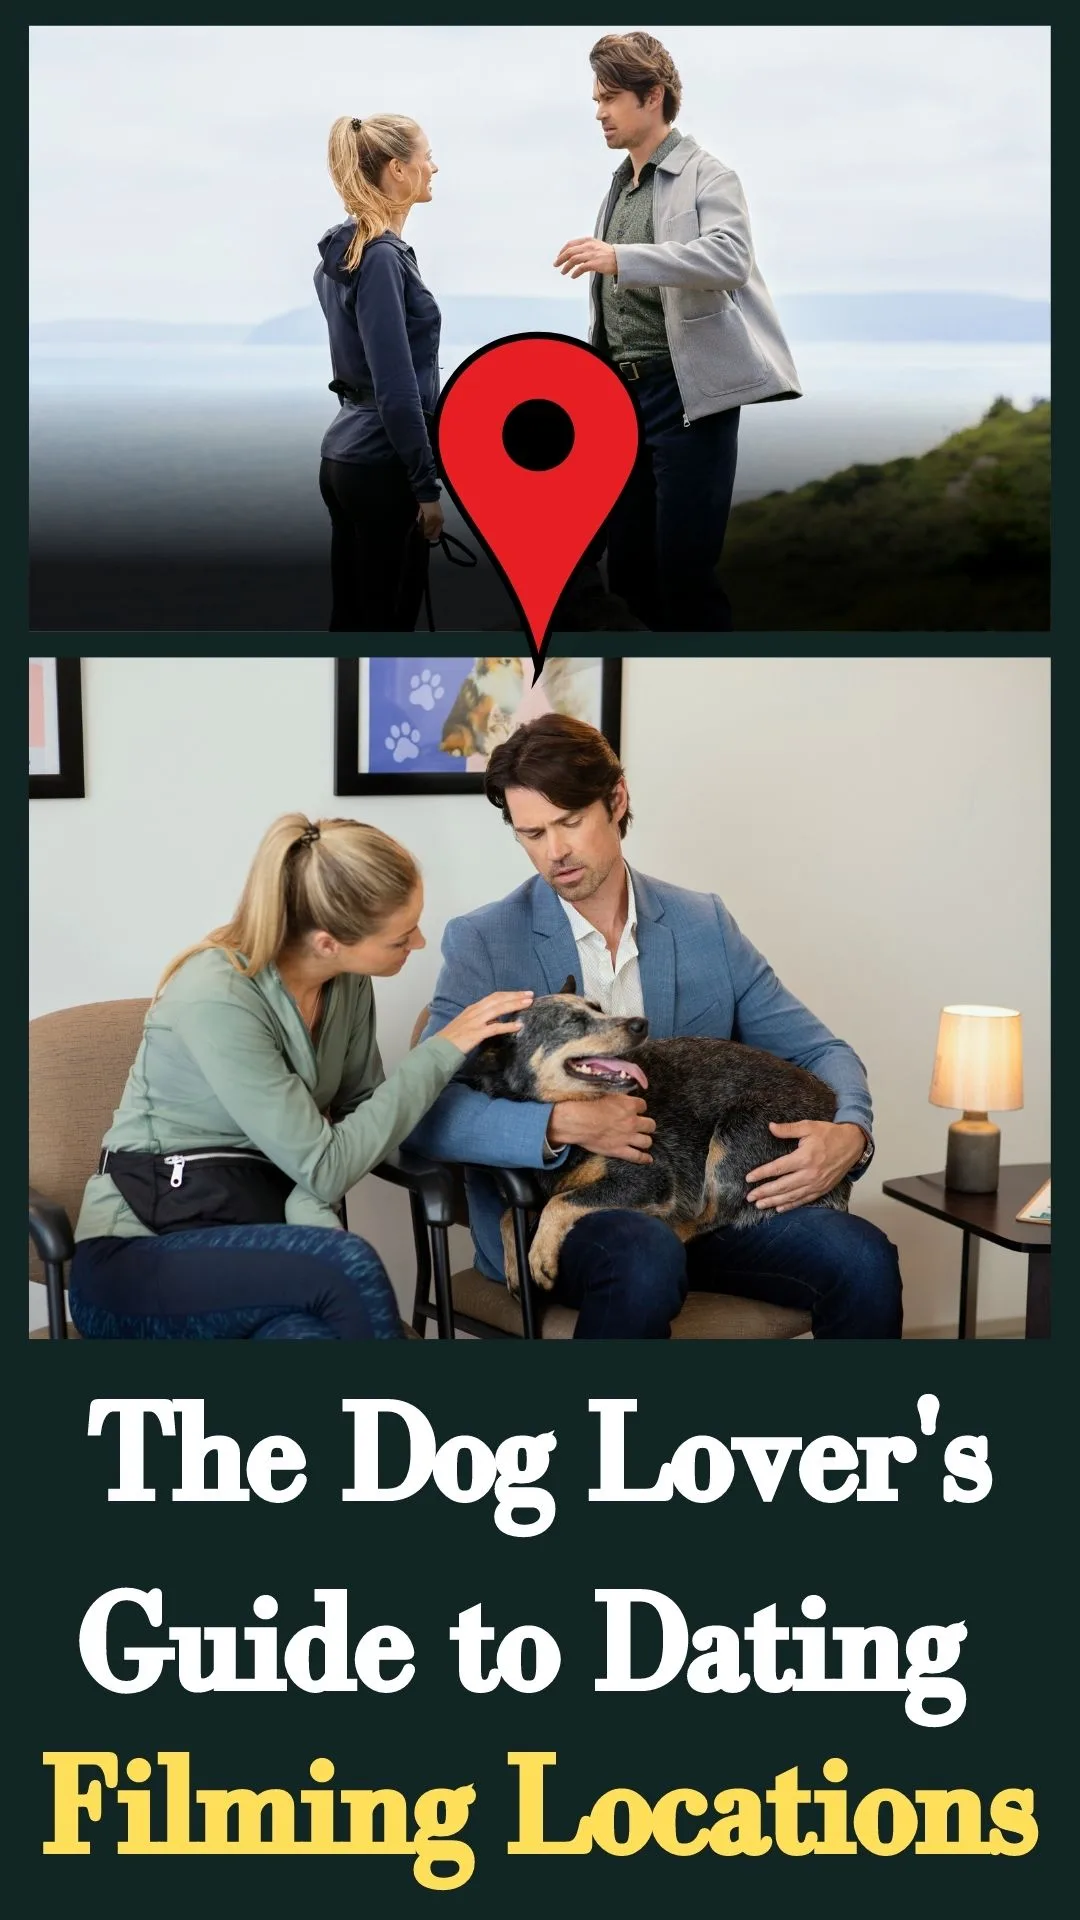 The Dog Lover's Guide to Dating Filming Locations